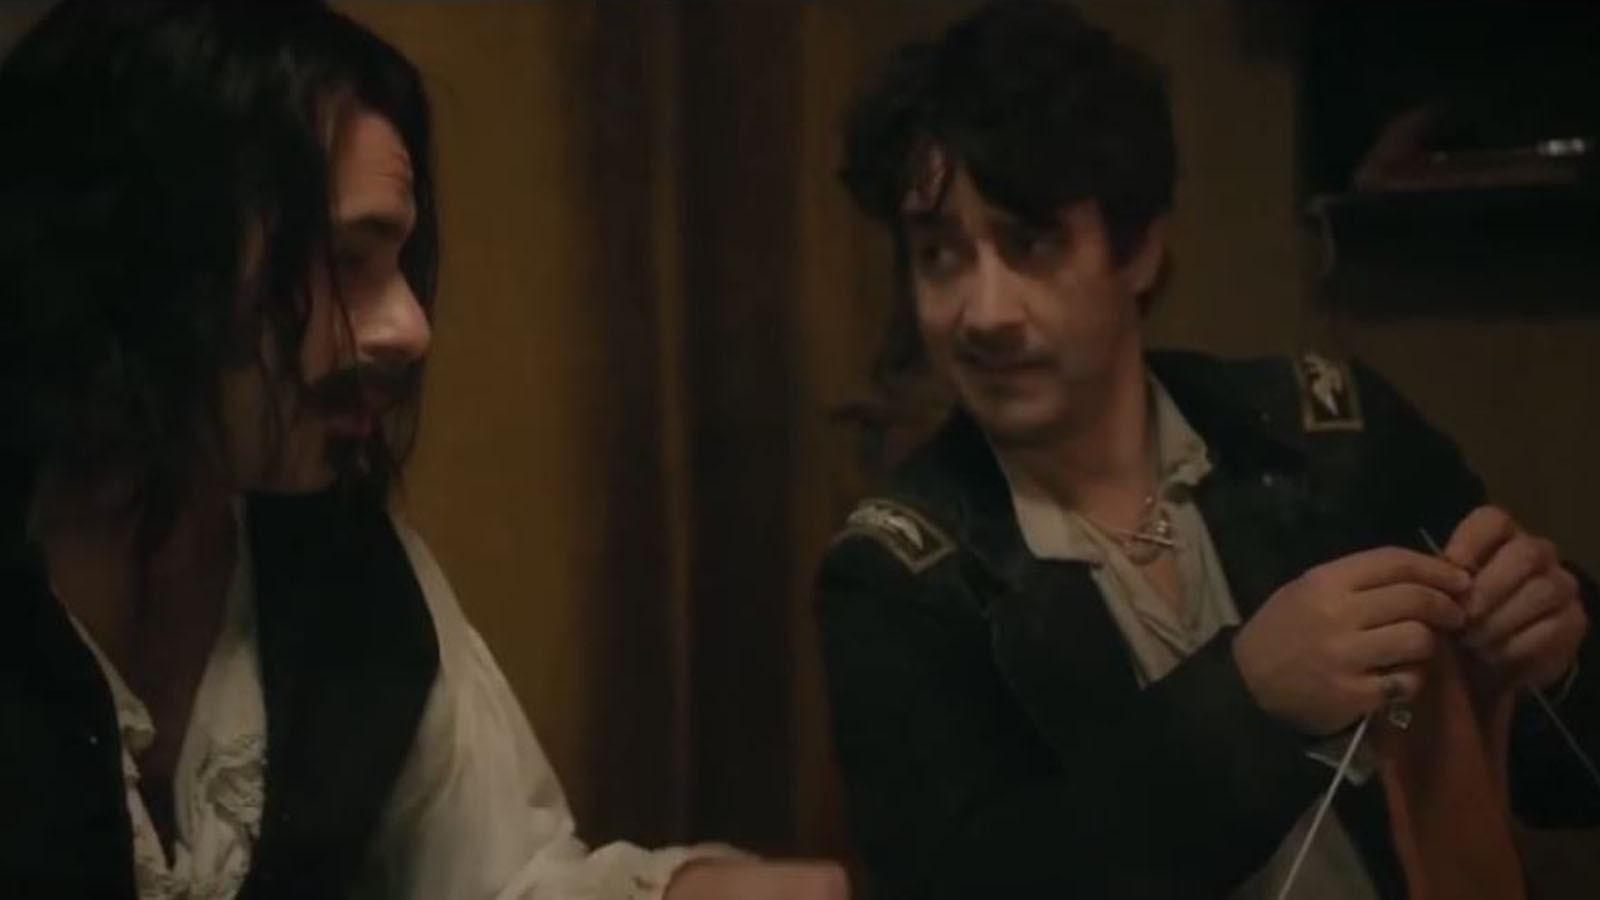 What We Do in the Shadows' trailer